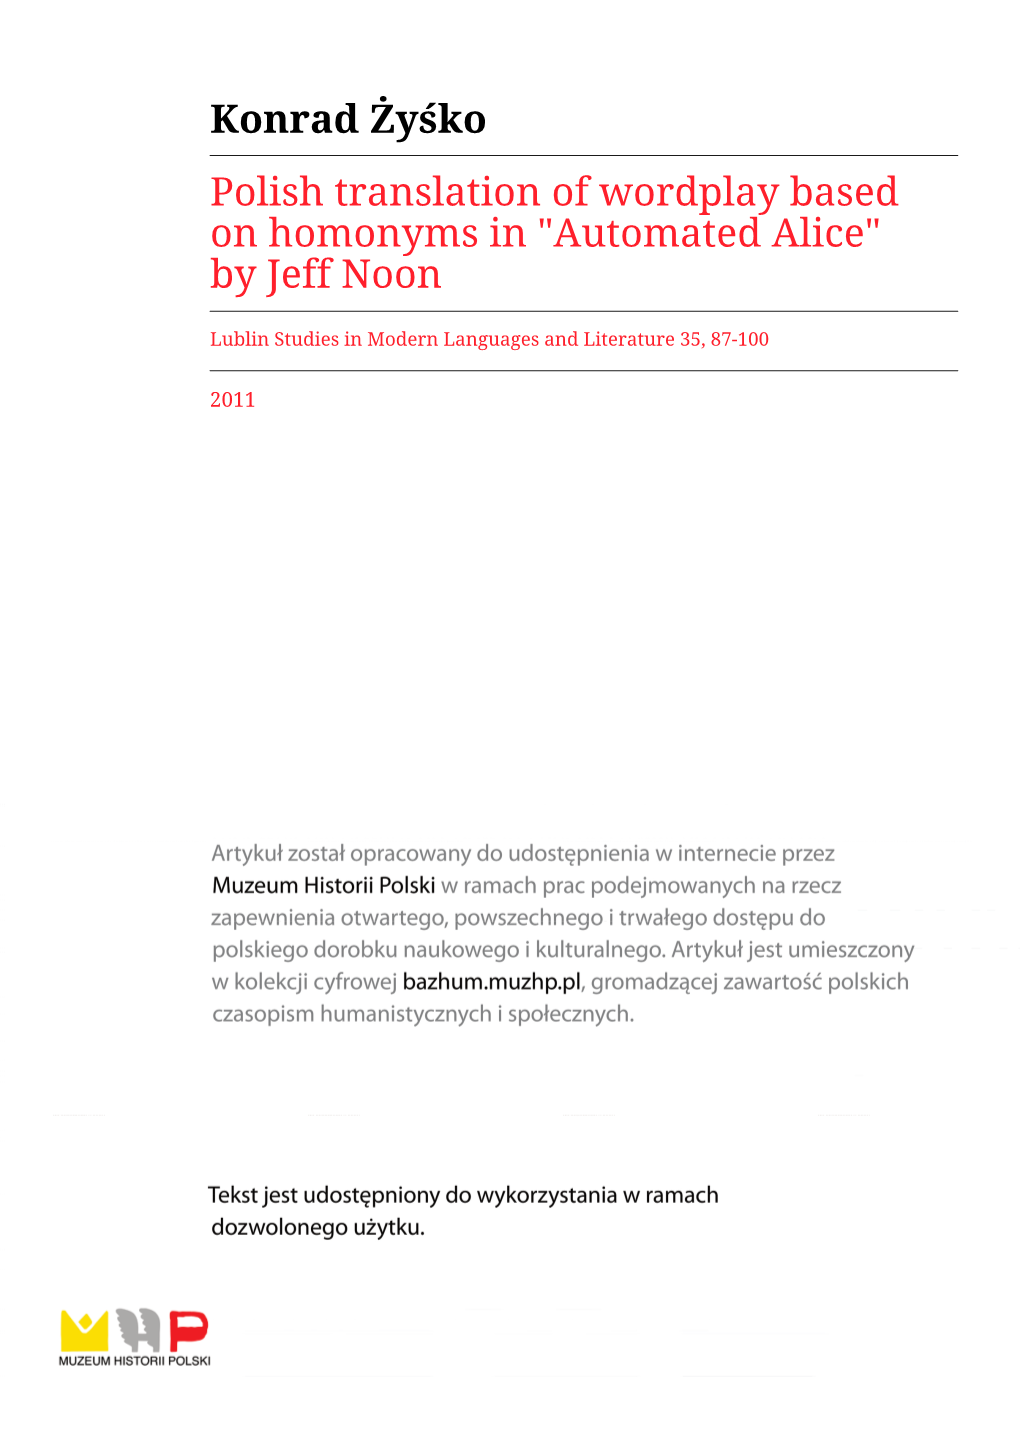 "Automated Alice" by Jeff Noon